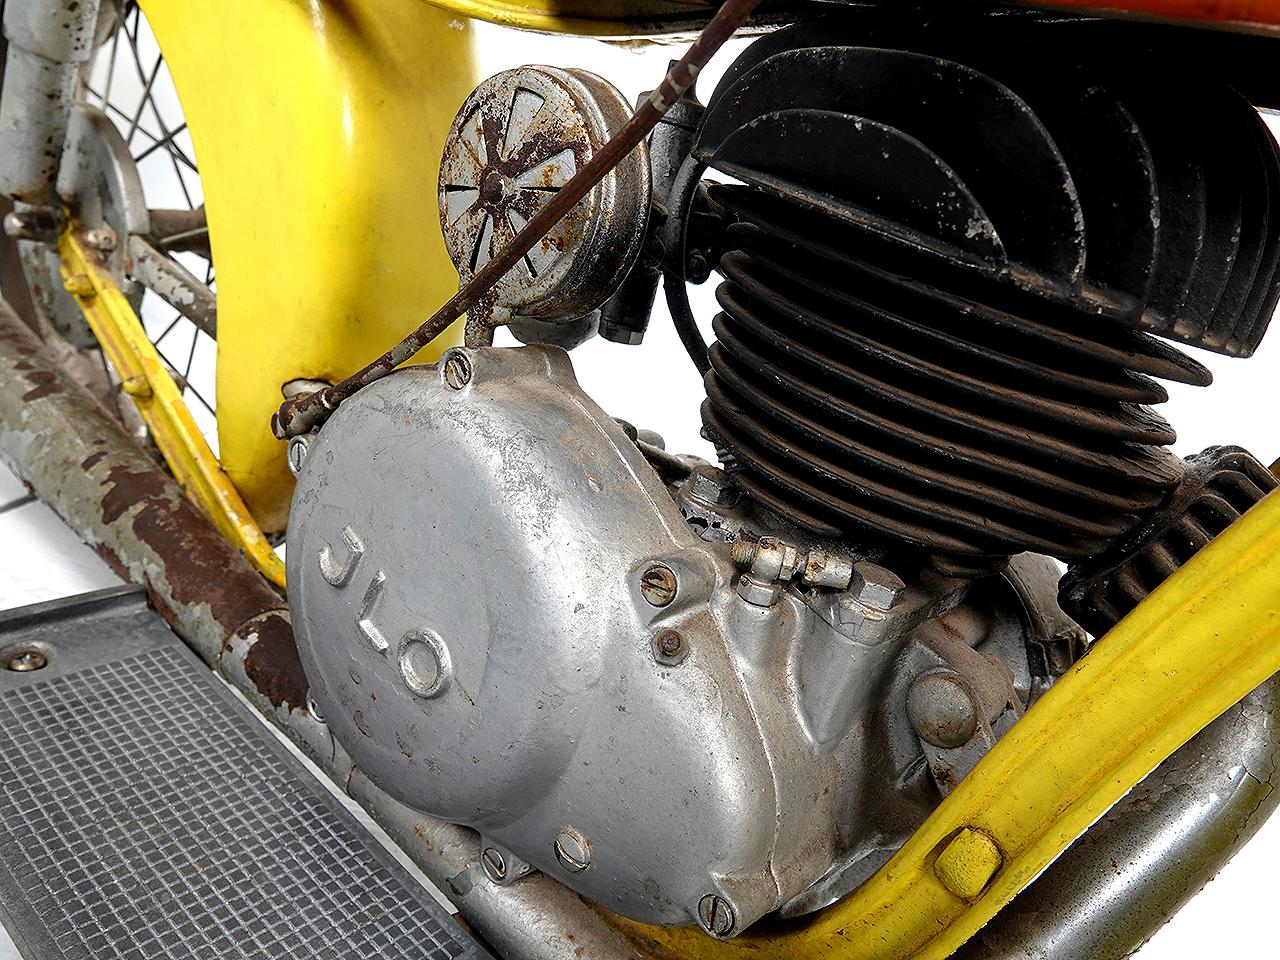 1950s motorcycle for sale